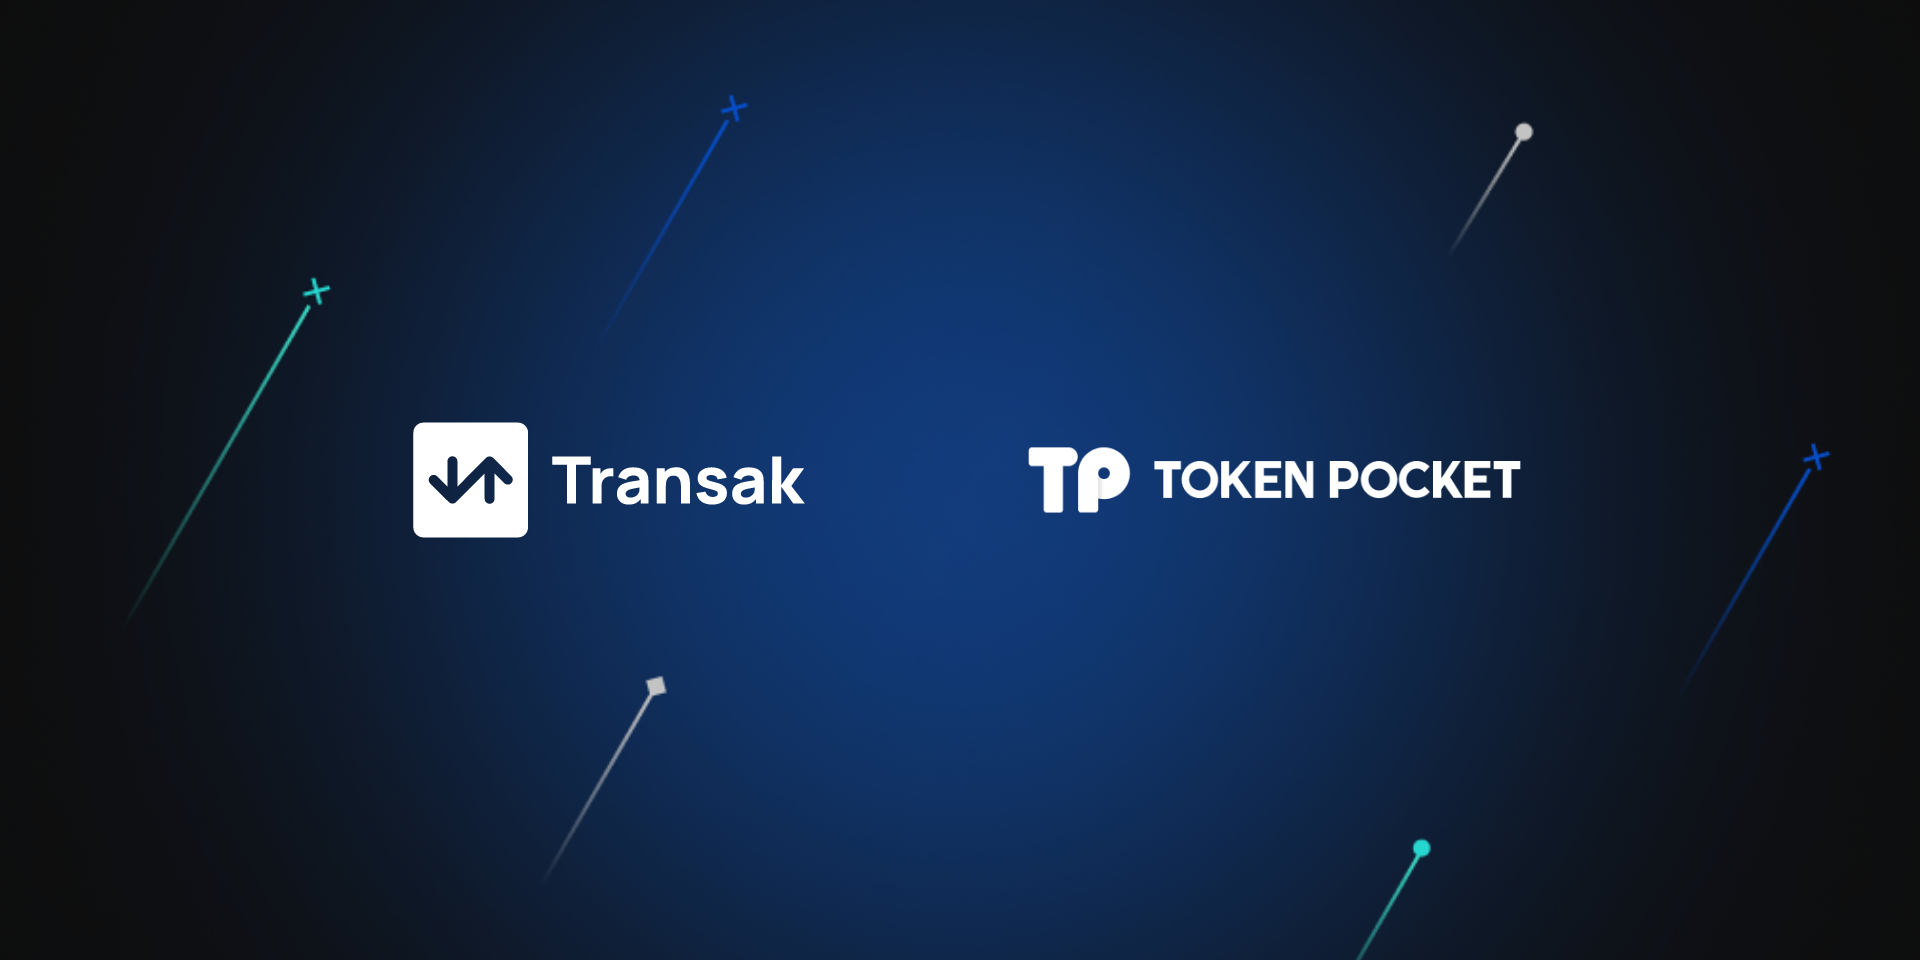 Buy Crypto directly on TokenPocket with Fiat currency using Transak